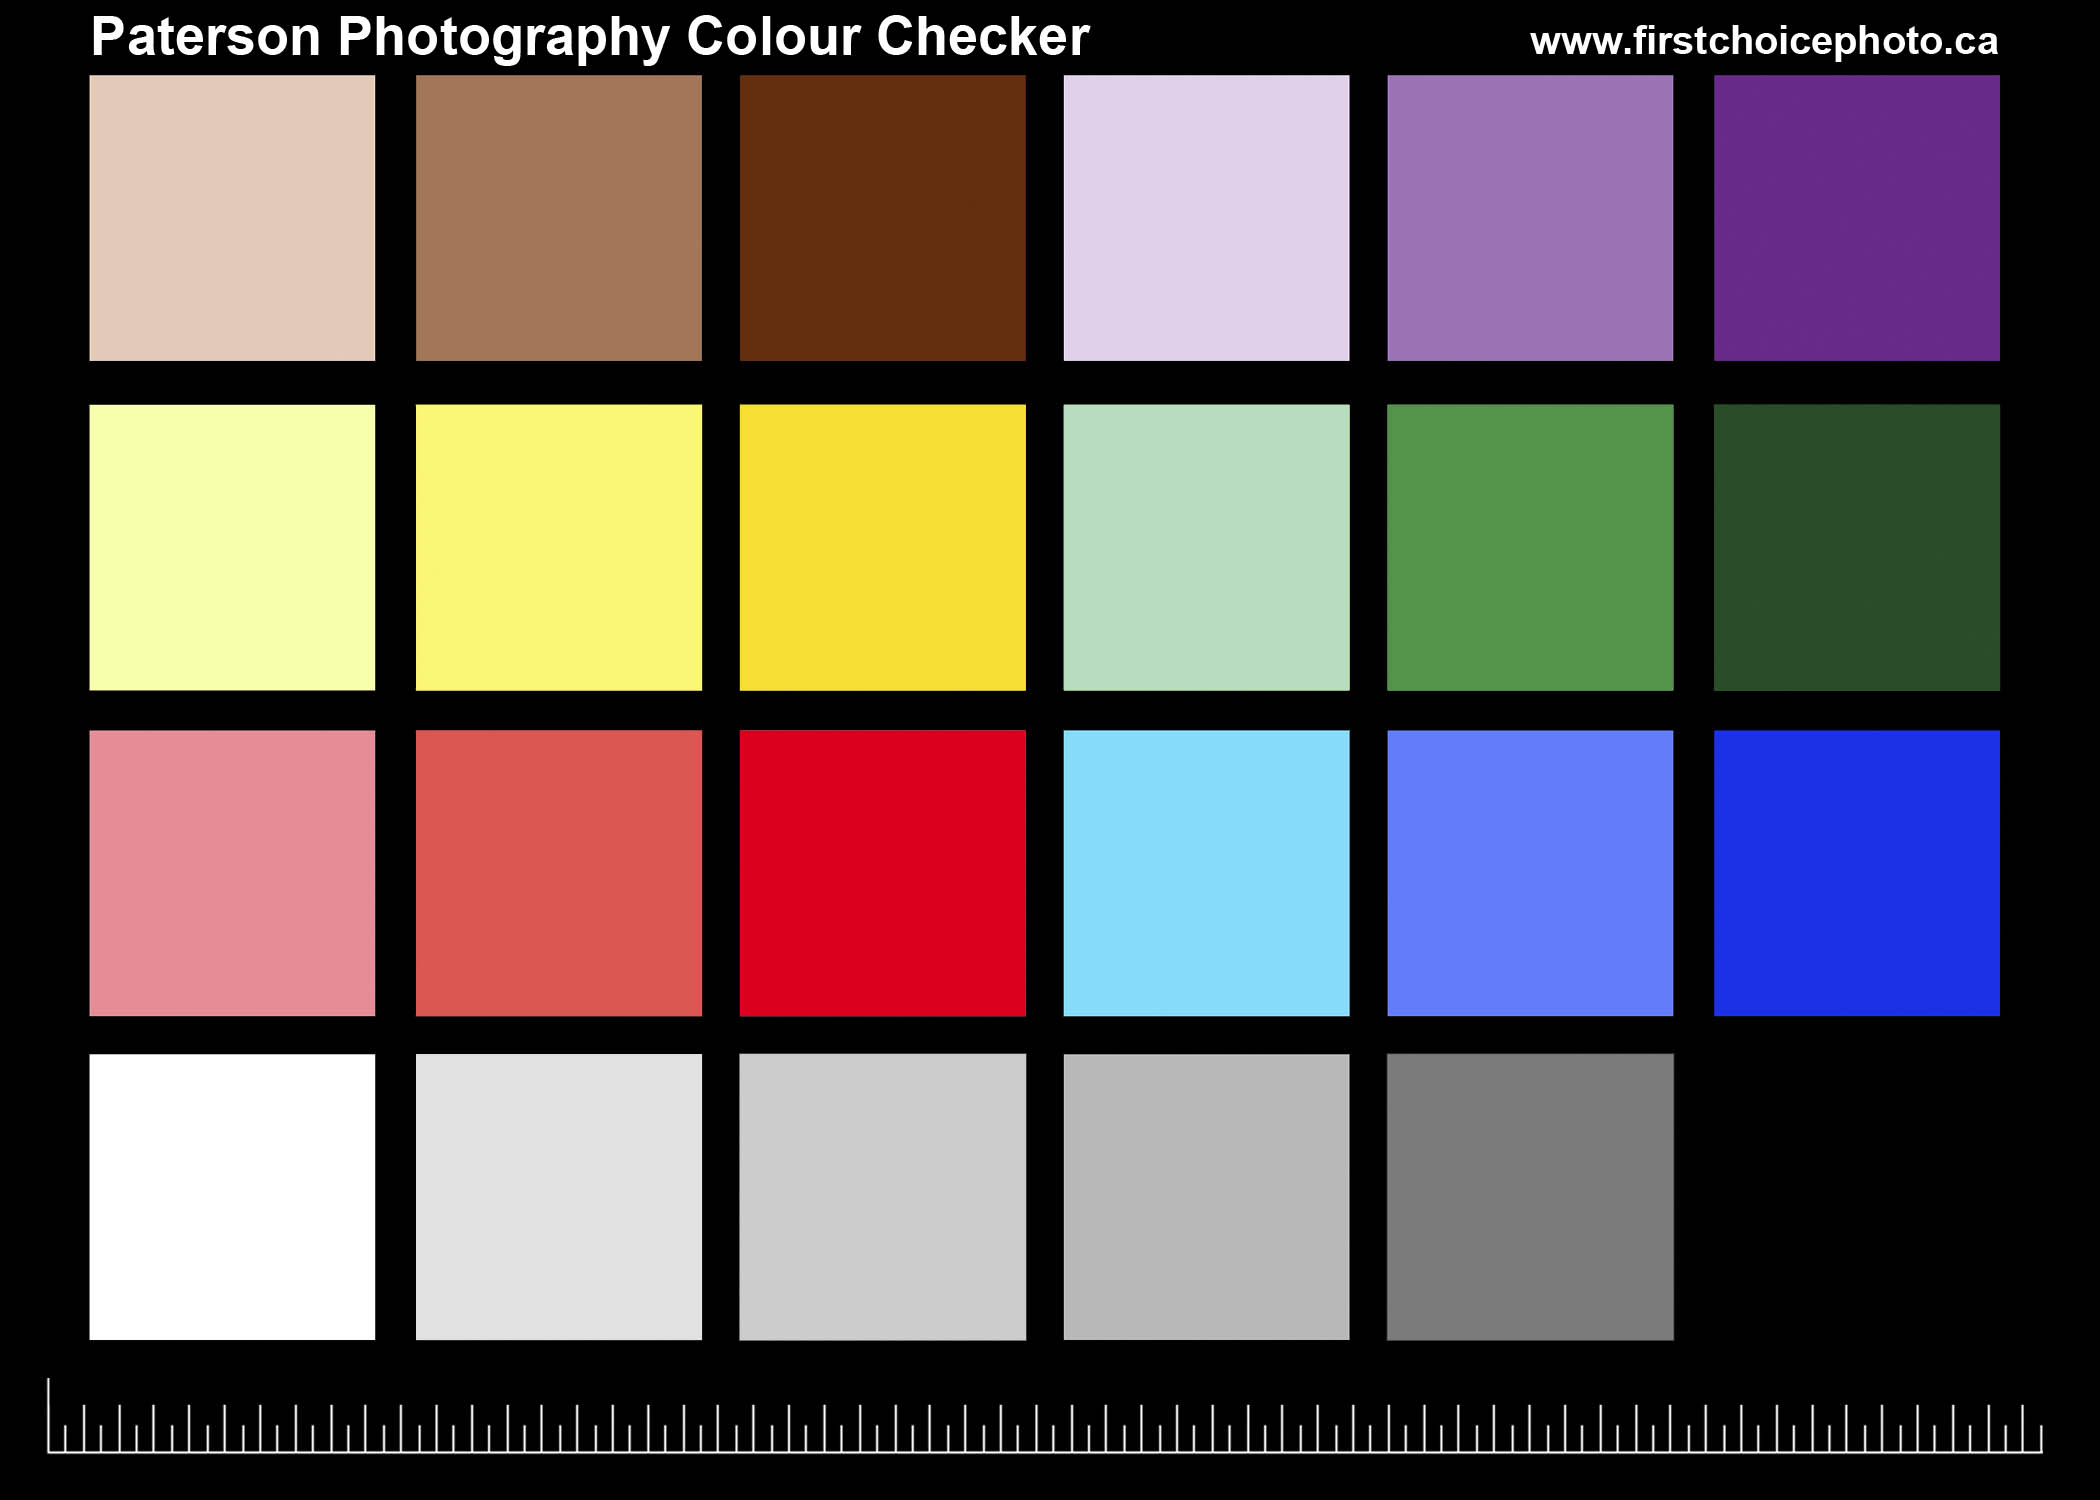 Color Checker for the photographer - FREE - First Choice Photo